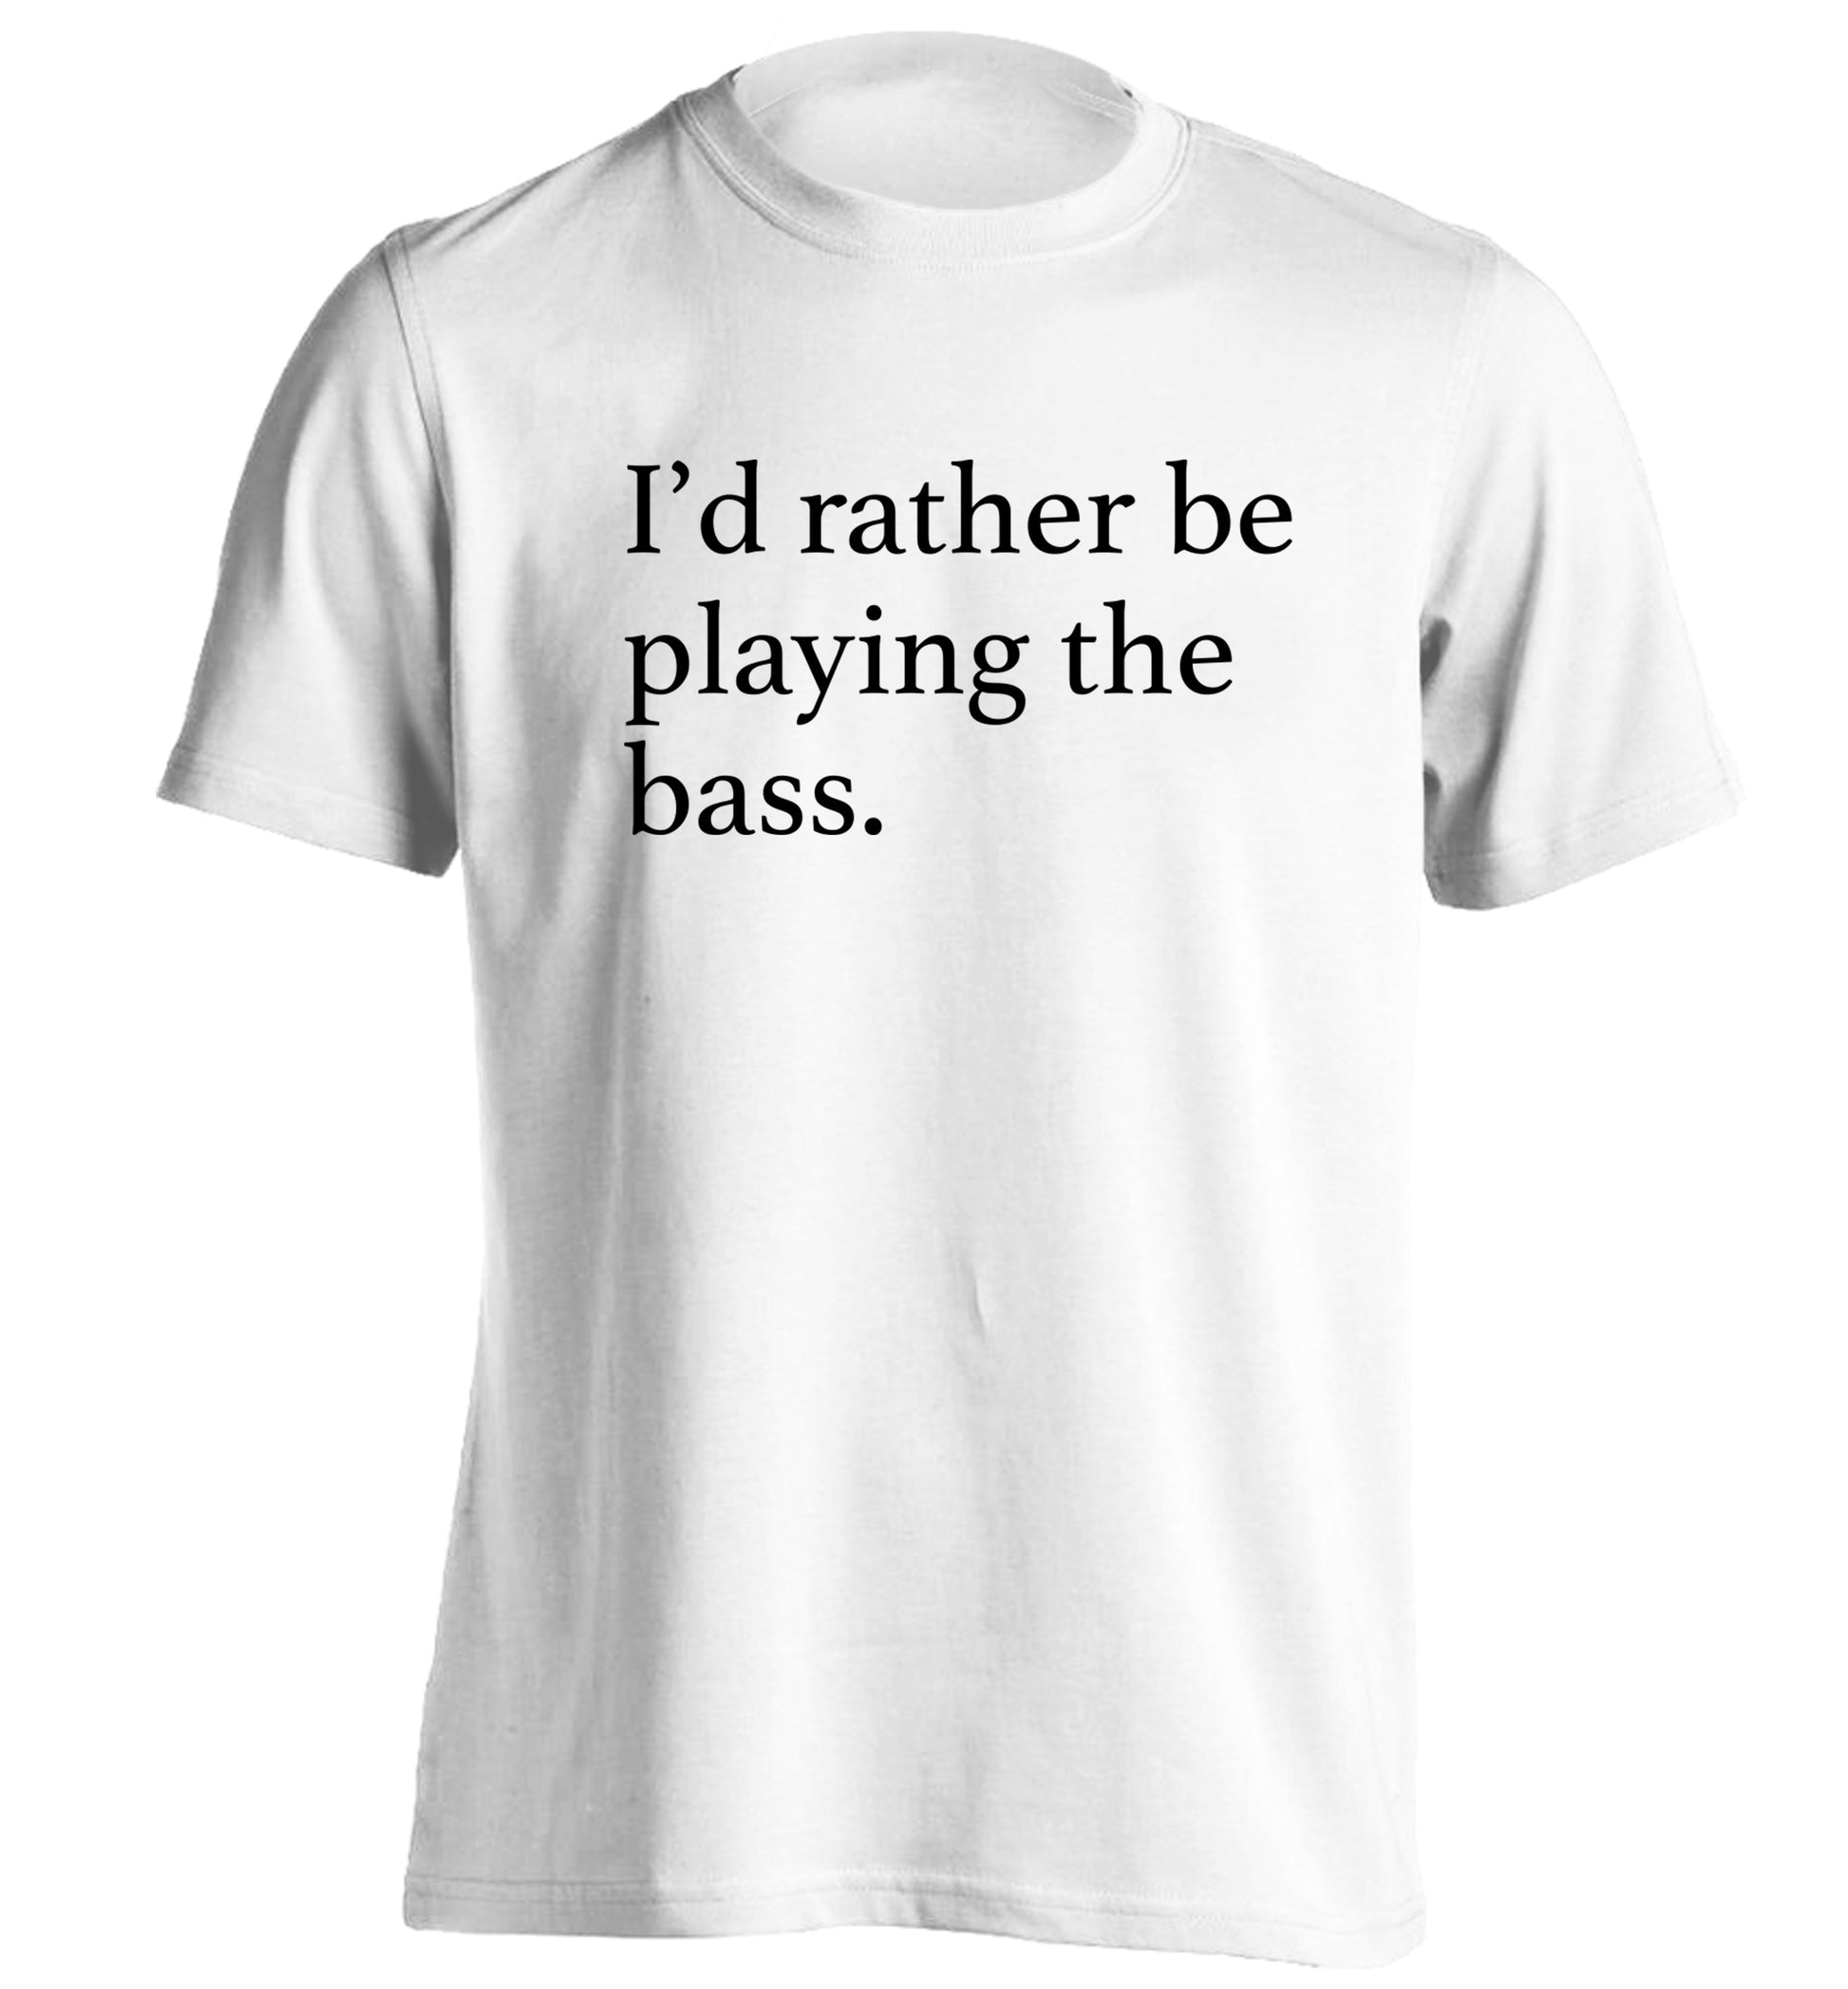 I'd rather by playing the bass adults unisex white Tshirt 2XL